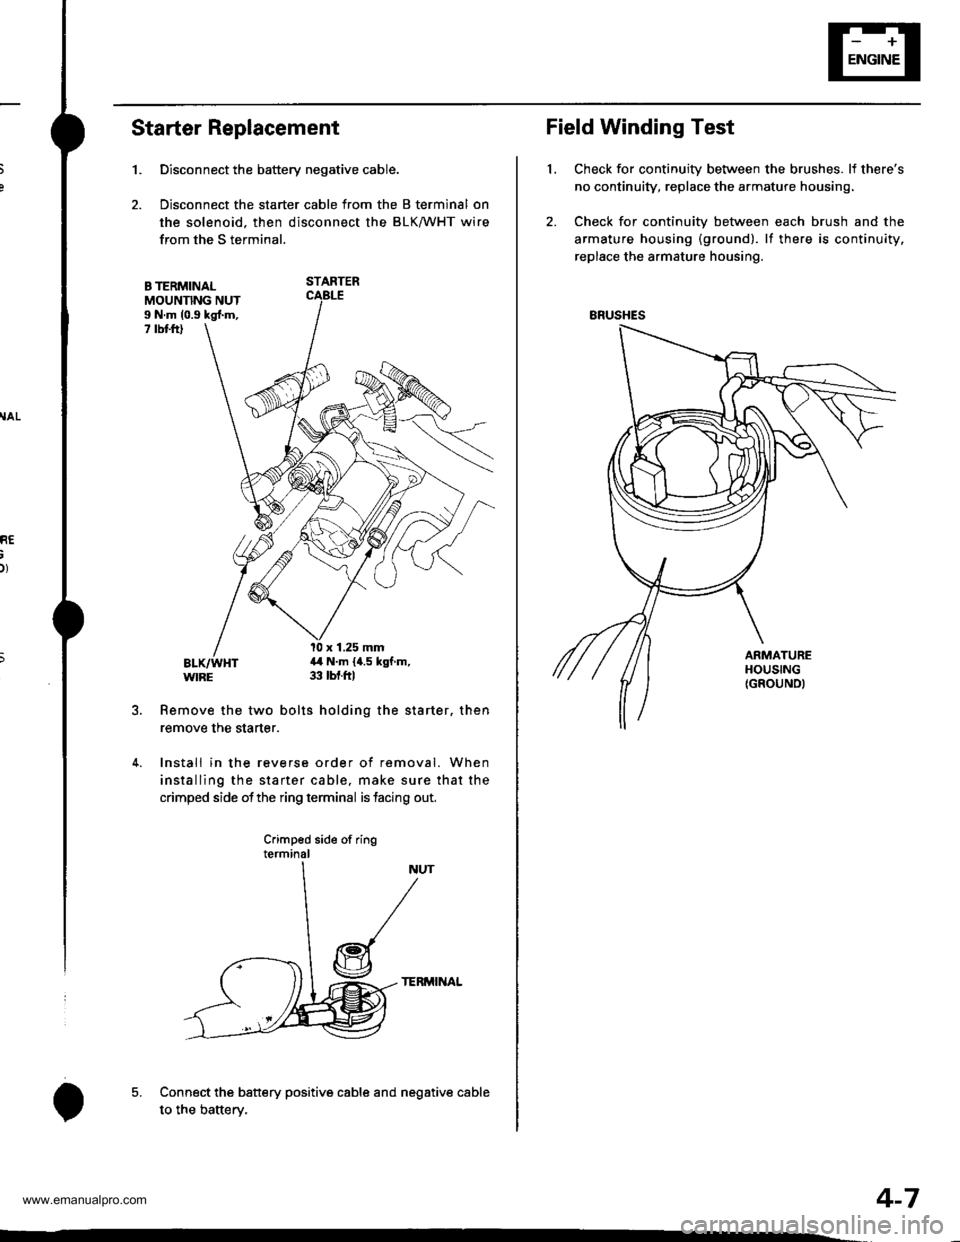 HONDA CR-V 1998 RD1-RD3 / 1.G Workshop Manual 
RE
Starter Replacement
1.
B TERMINALMOUNNNG NUTI N.m (0.9 kgl.m,7 rbt ftl
Remove the two bolts holding the starter. then
remove the starter.
4. Install in the reverse order of removal. When
installin